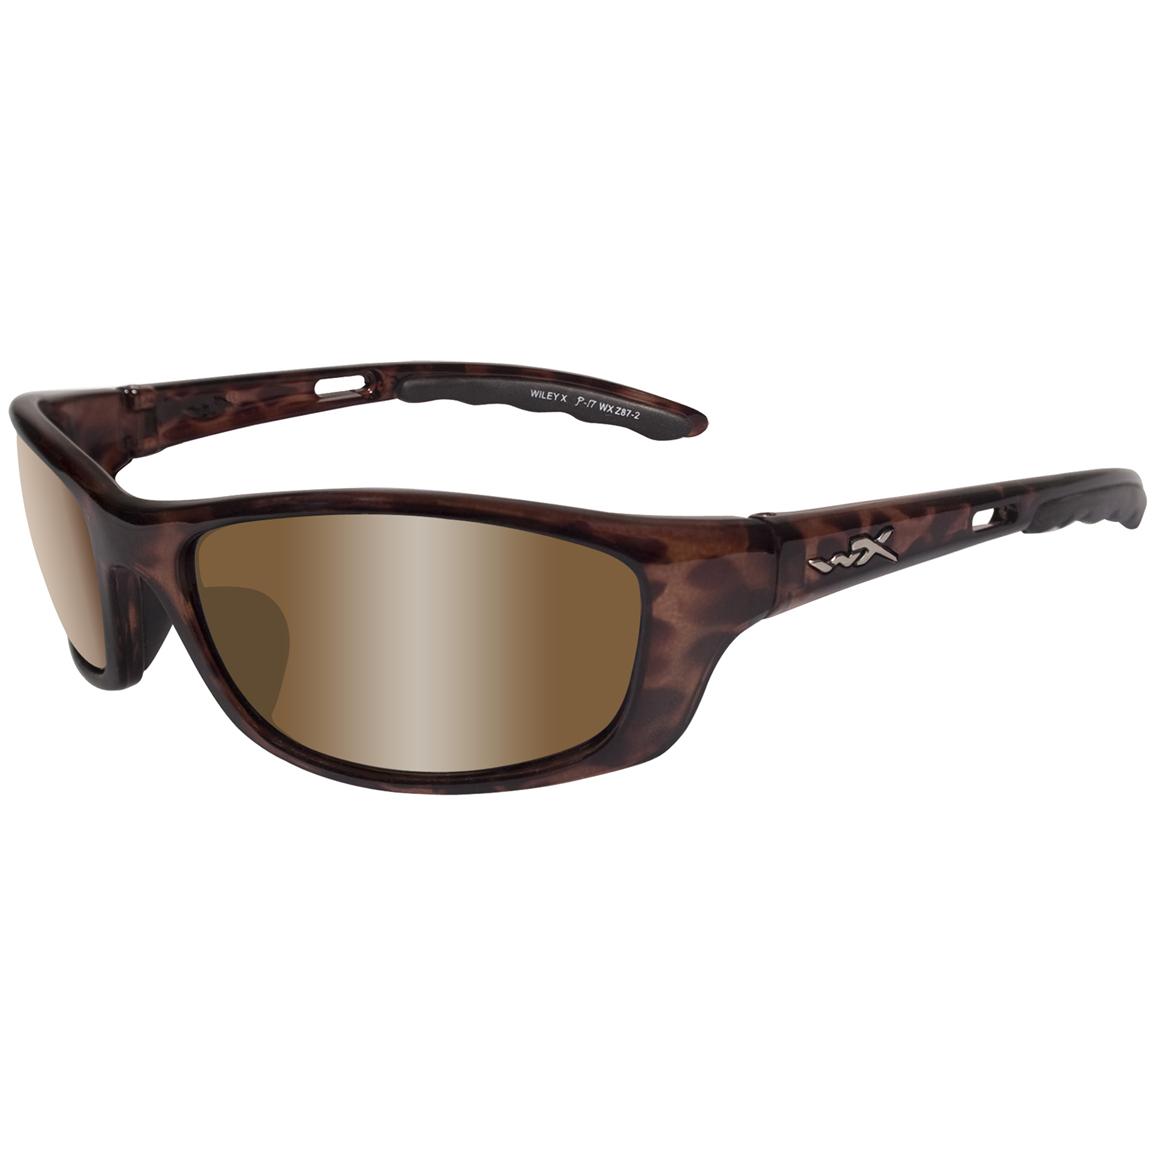 Wiley X P-17 Black Ops Active Series Sunglasses - 611838, Sunglasses ...